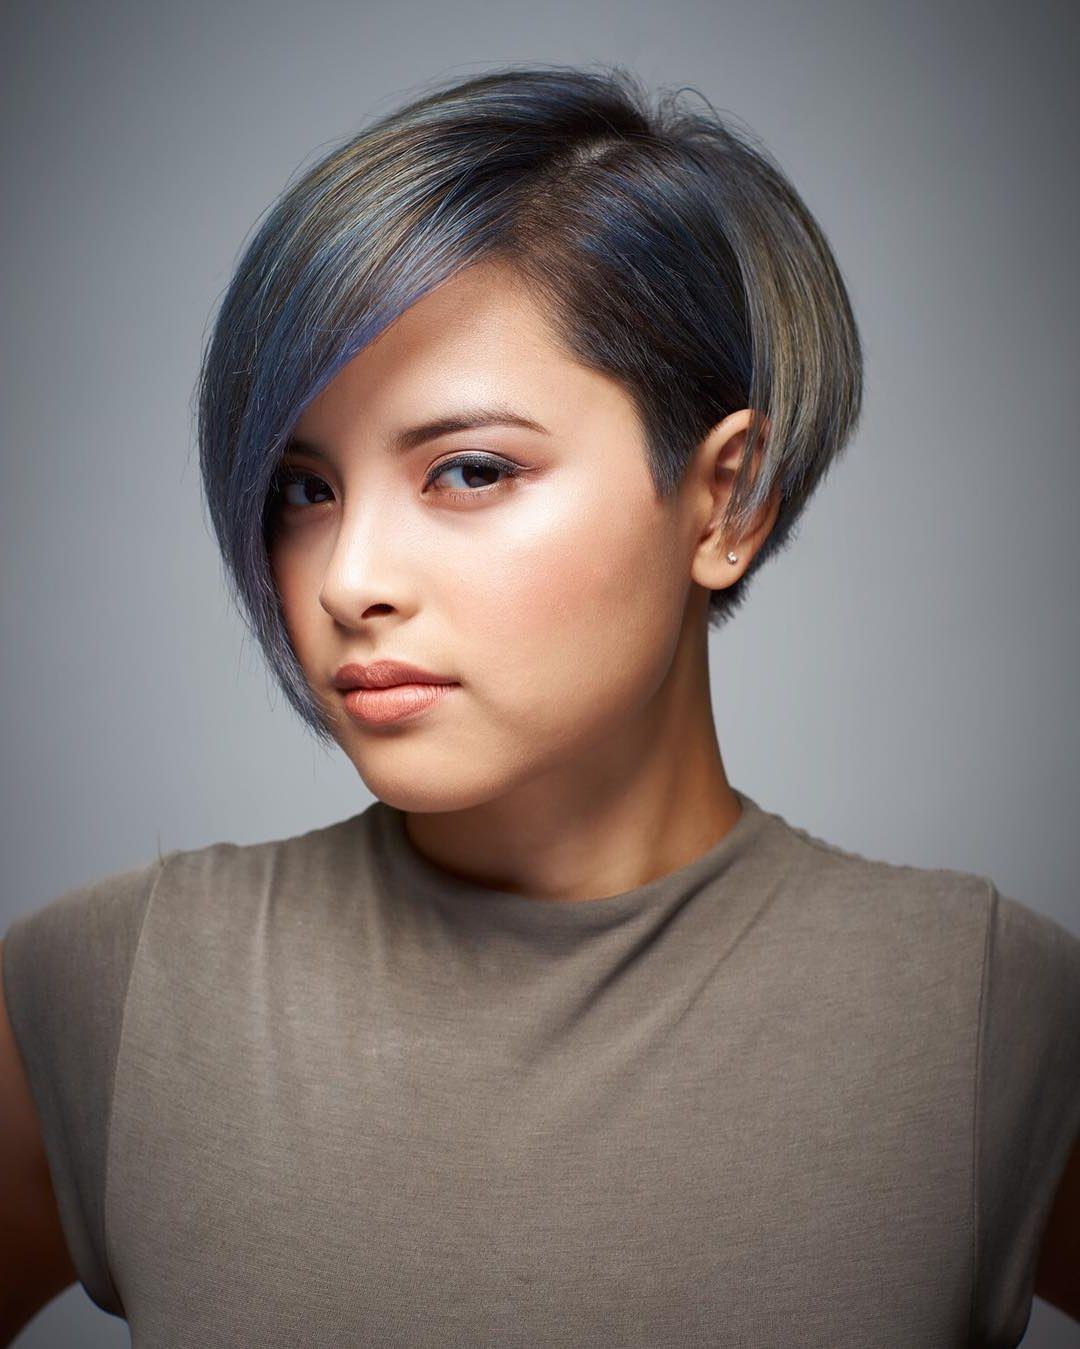 Short Hairstyles: 15 Cutest Short Haircuts For Women In 2017 For Asymmetrical Short Haircuts For Women (View 15 of 25)